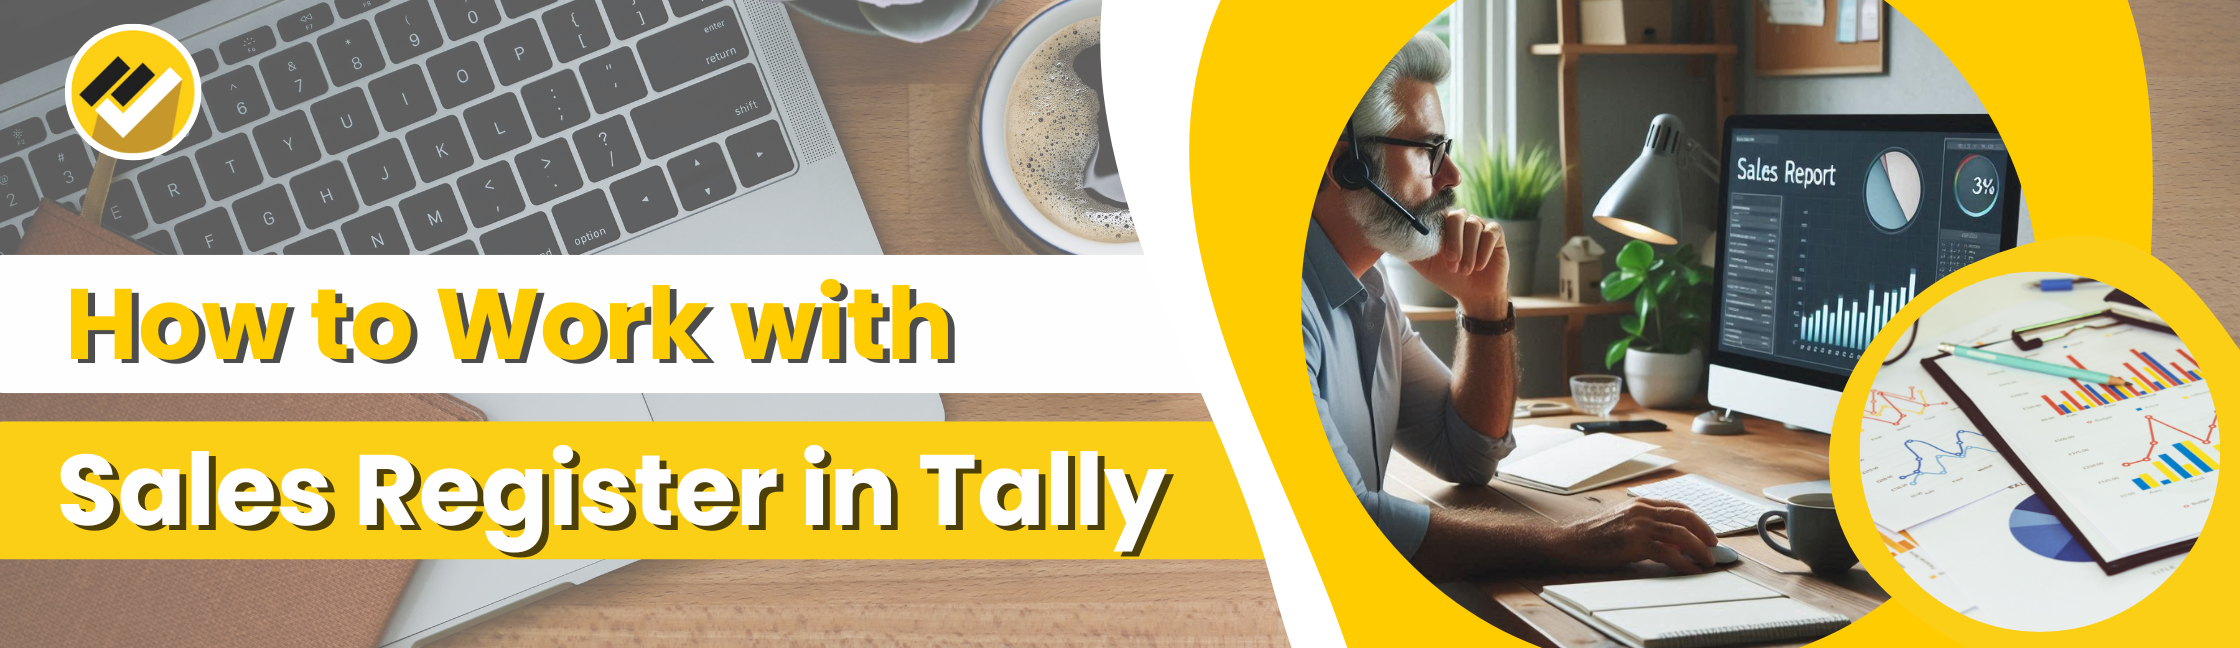 How to Work with Sales Register in Tally